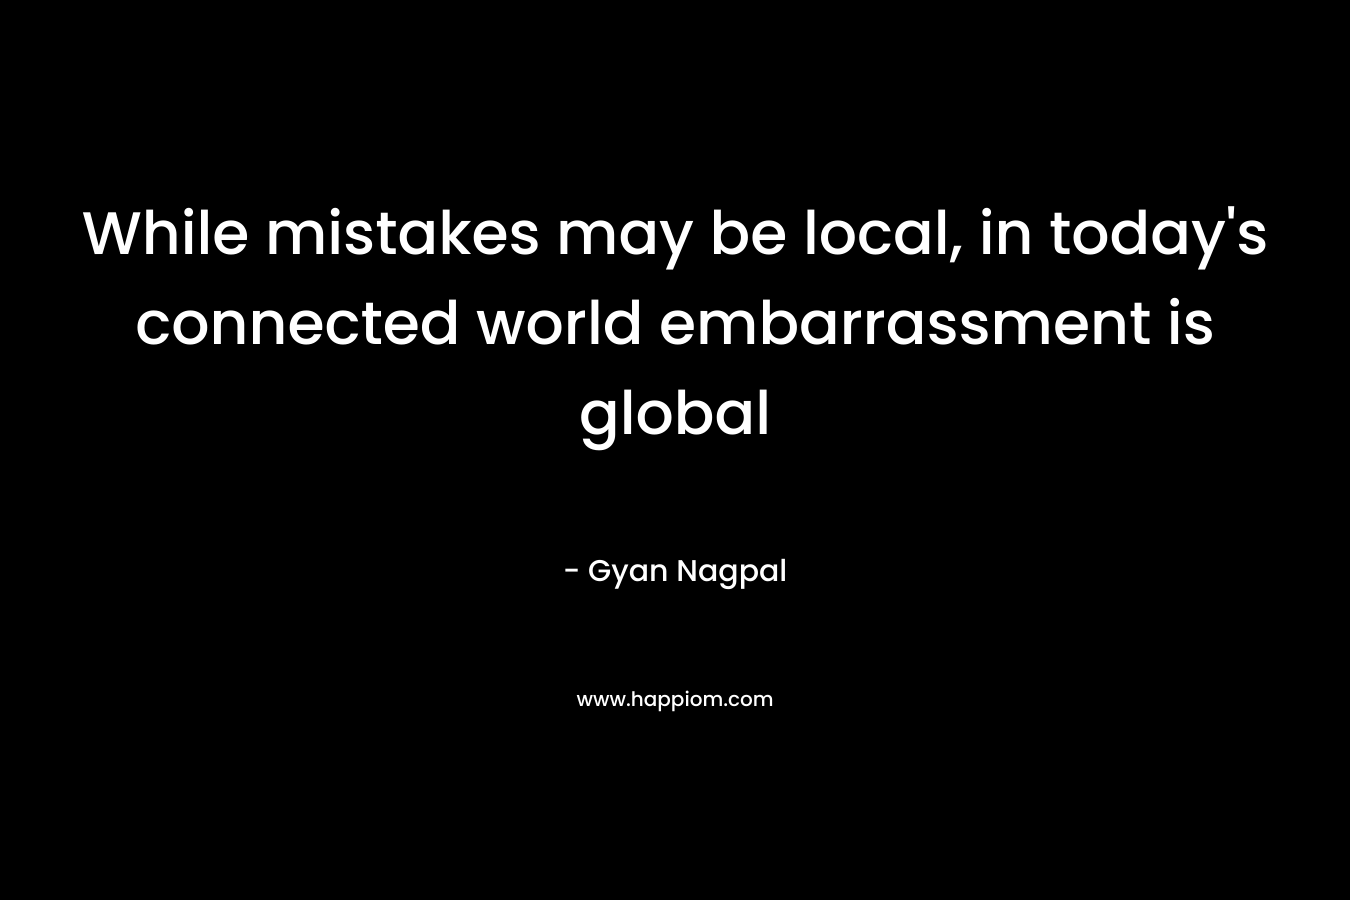 While mistakes may be local, in today's connected world embarrassment is global